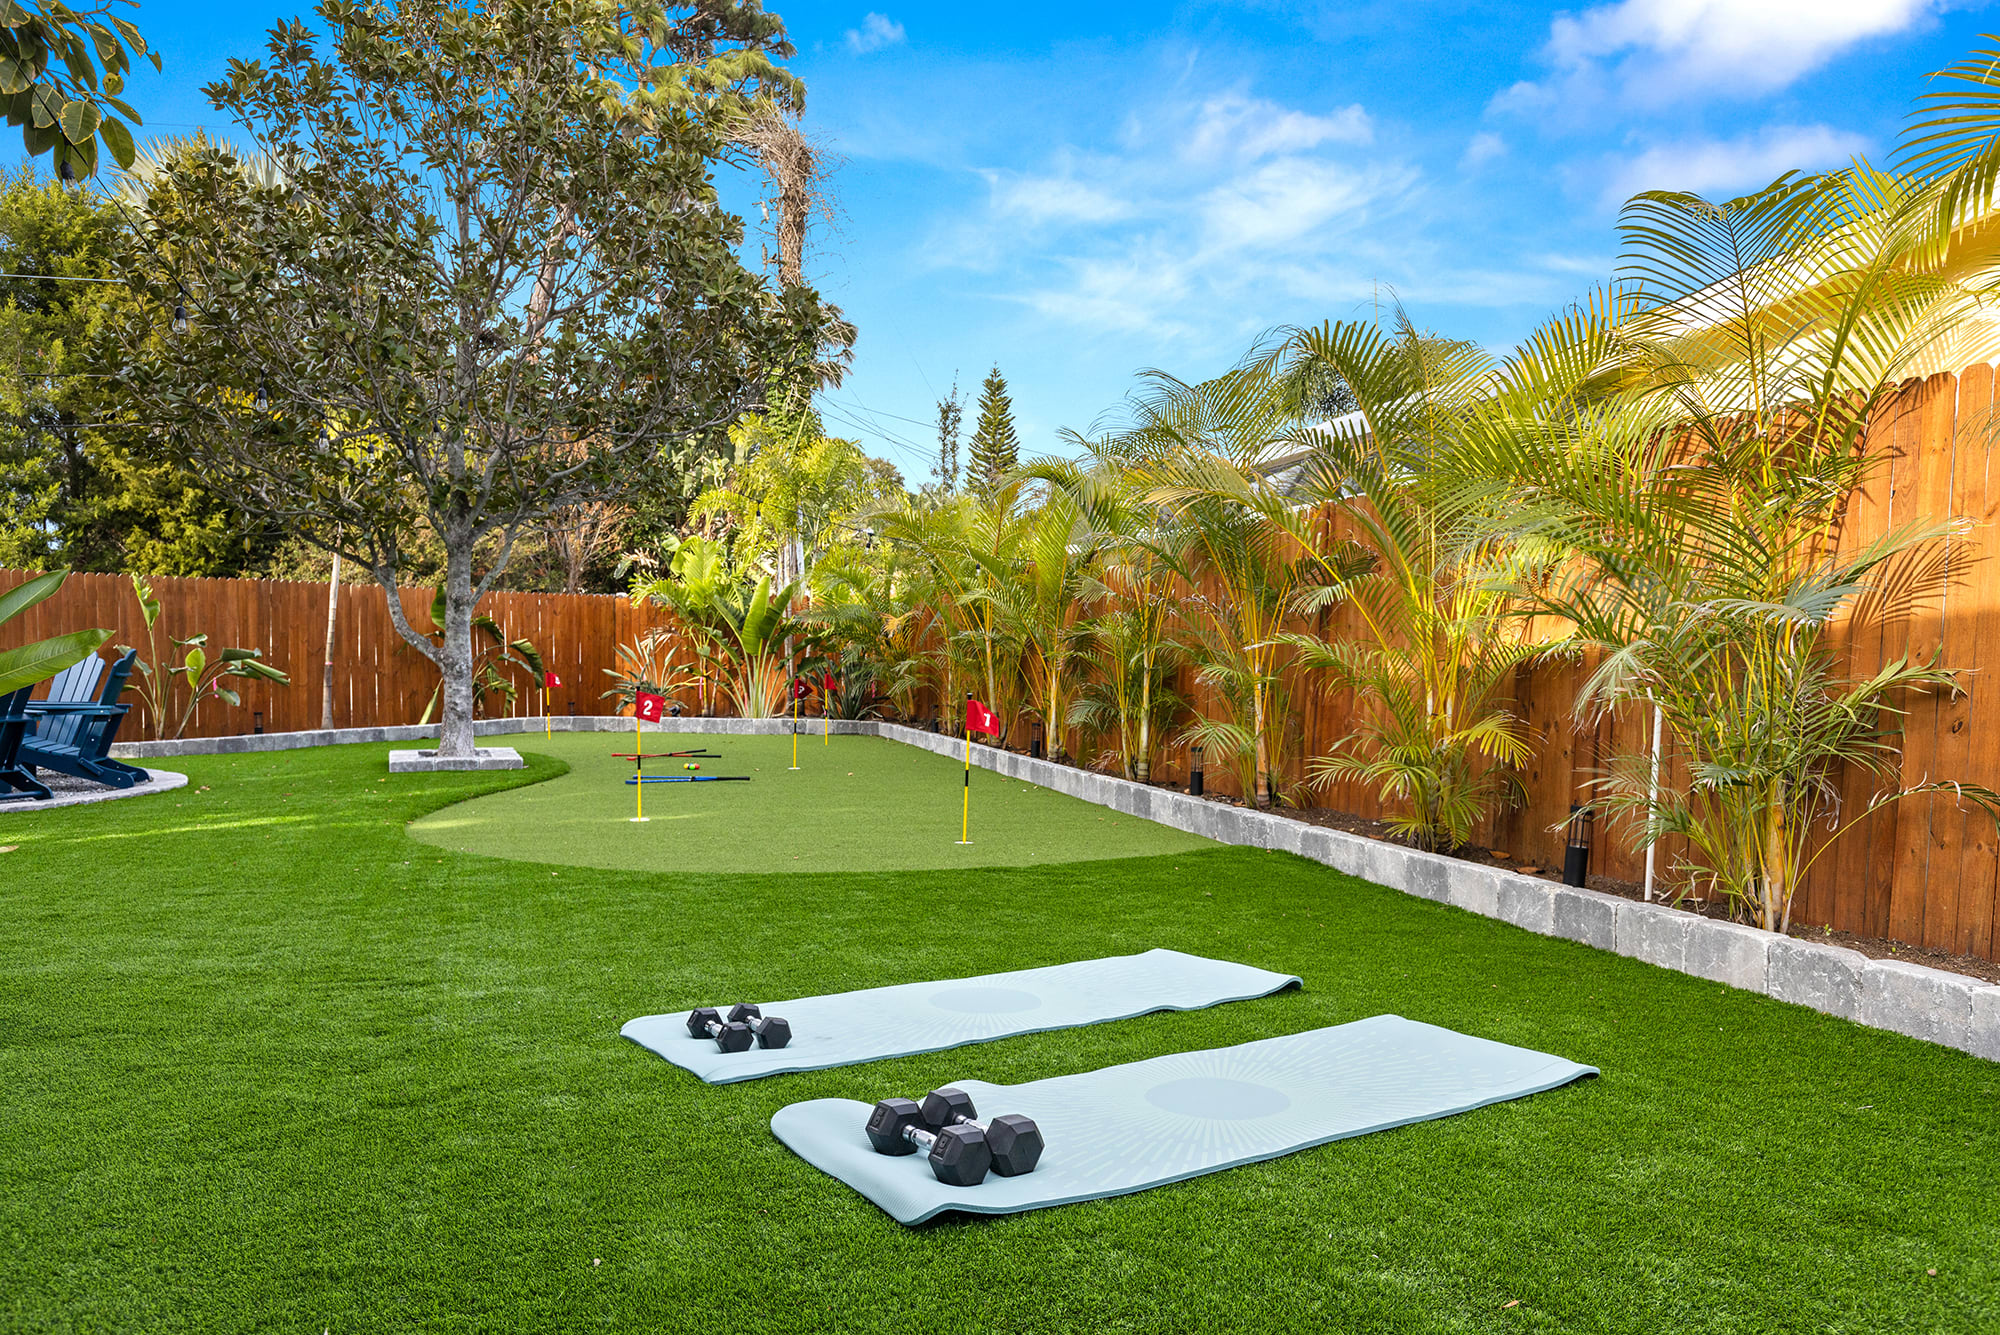 Enjoy the putting green with a ton of free turf space for other activities!